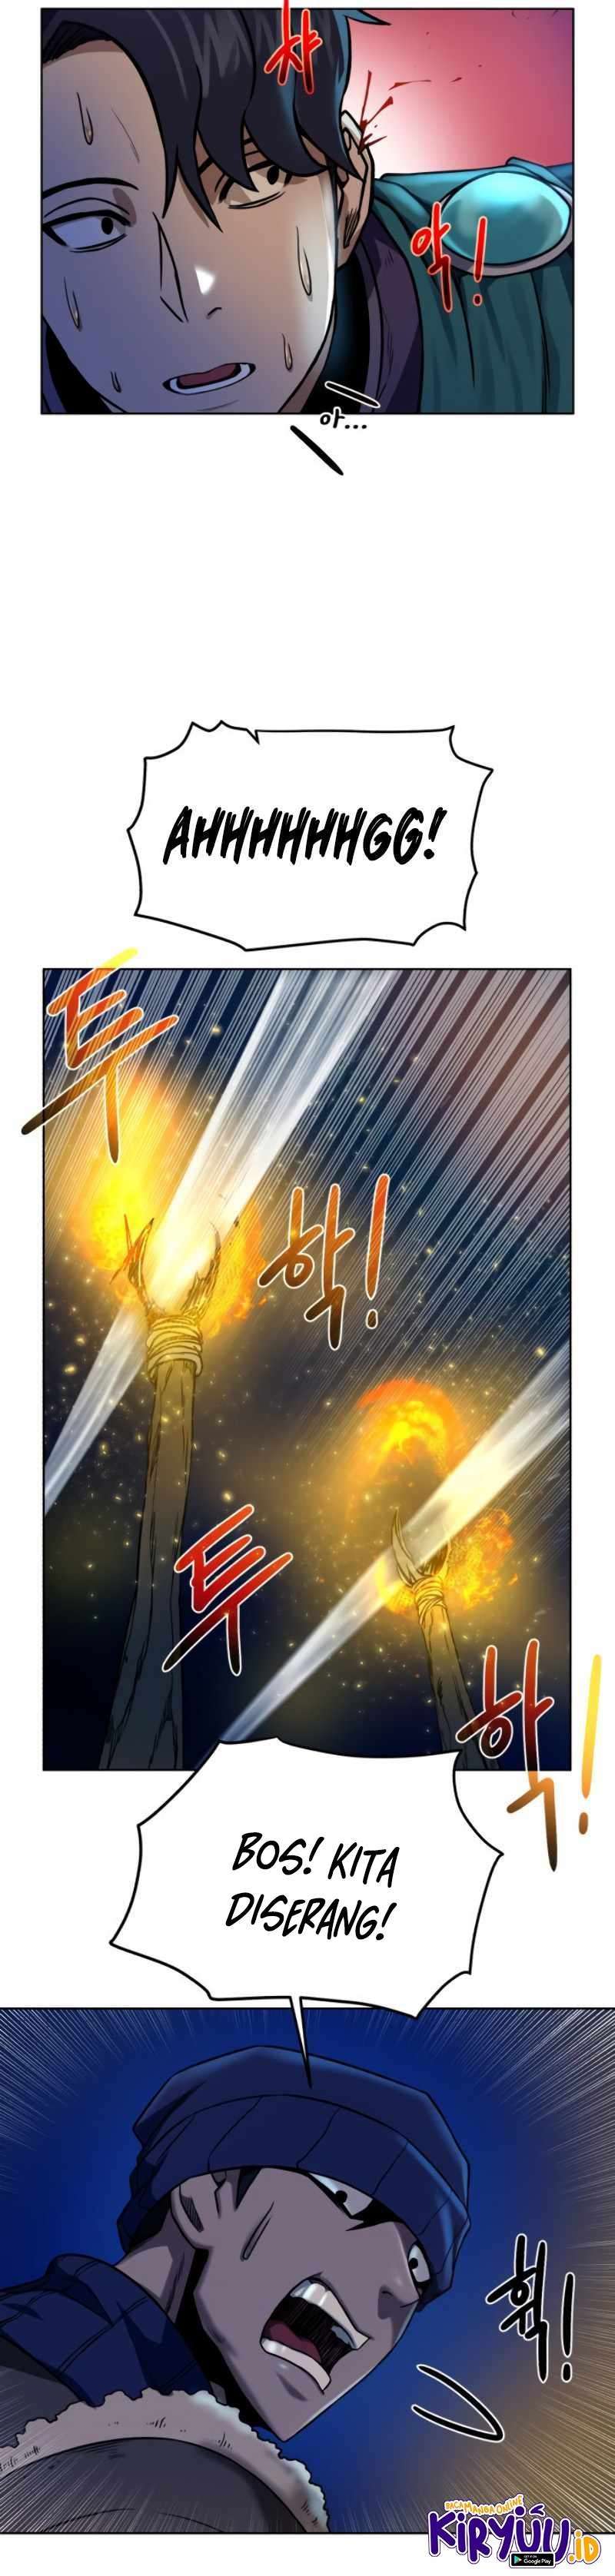 Dungeon and Artifact Chapter 25